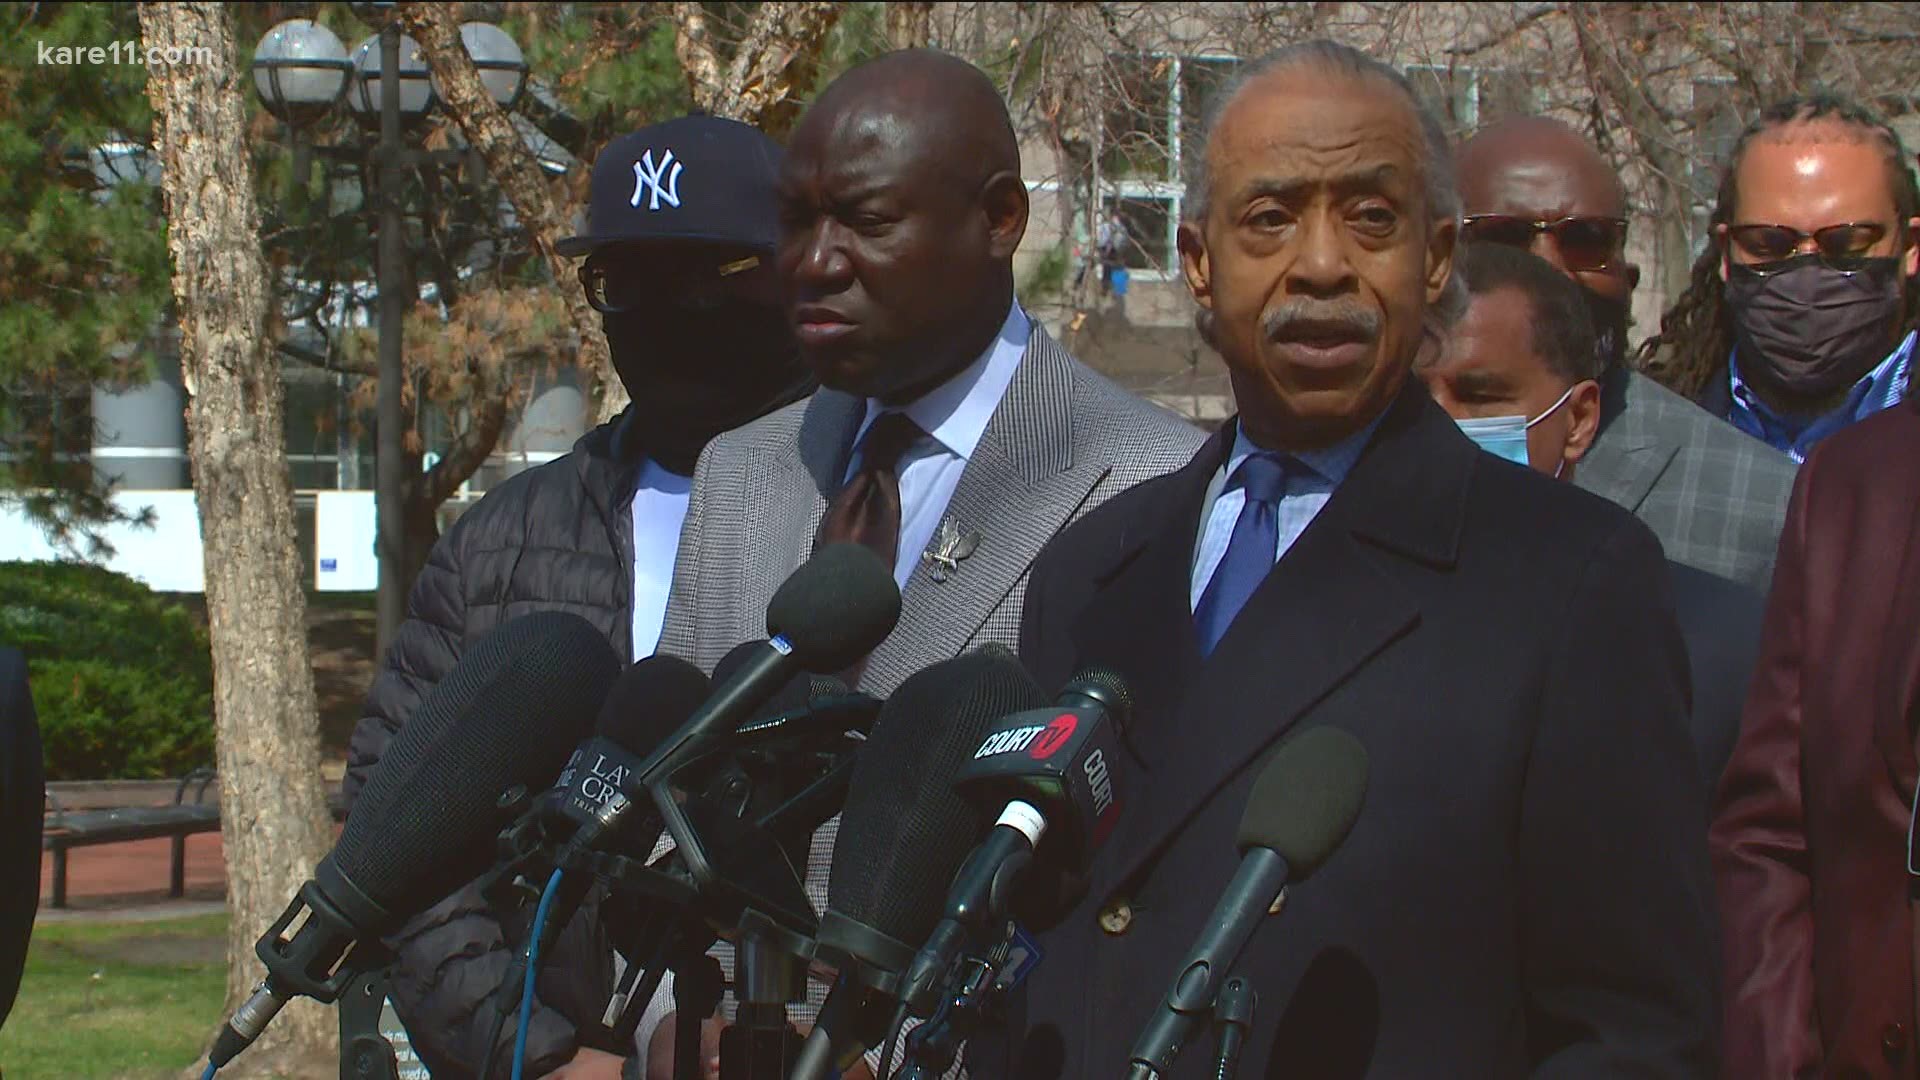 Sharpton, a civil rights leader, prayed for strength and justice. He was joined by Floyd family members, the mother of Eric Garner and attorney Ben Crump.